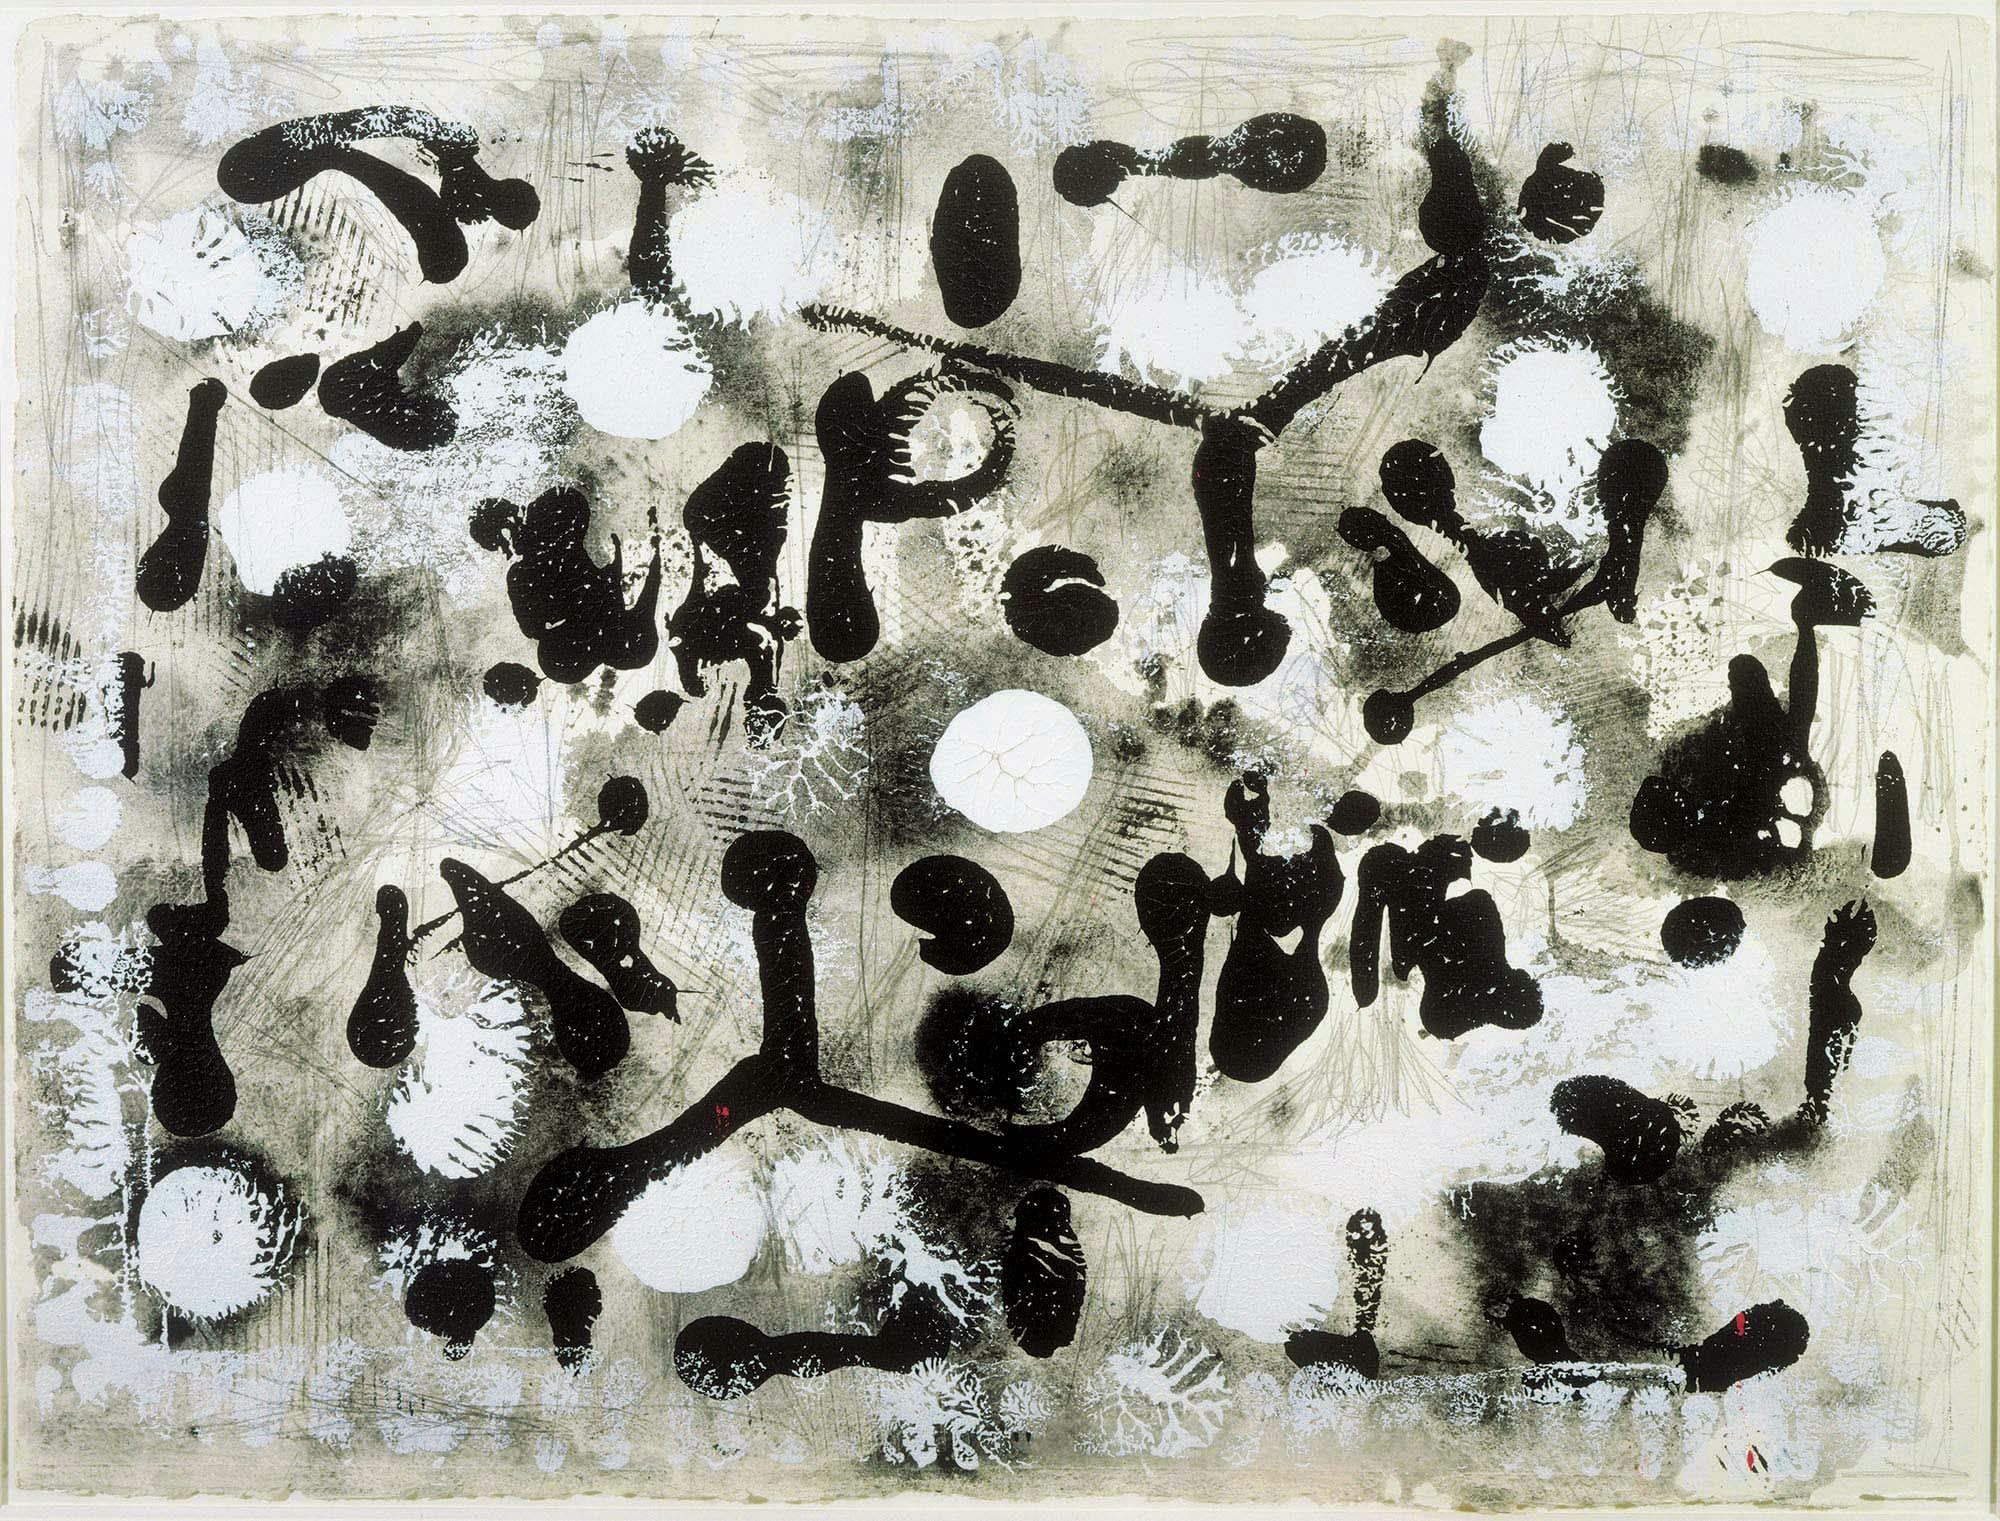 Immortal Prints
1978
Acrylic and graphite on paper
22 1/2 x 30 in. (57.2 x 76.2 cm)
The Phillips Collection, Washington, D.C., Gift of Luther W. Brady (2009.012.0001)
 – The Richard Pousette-Dart Foundation